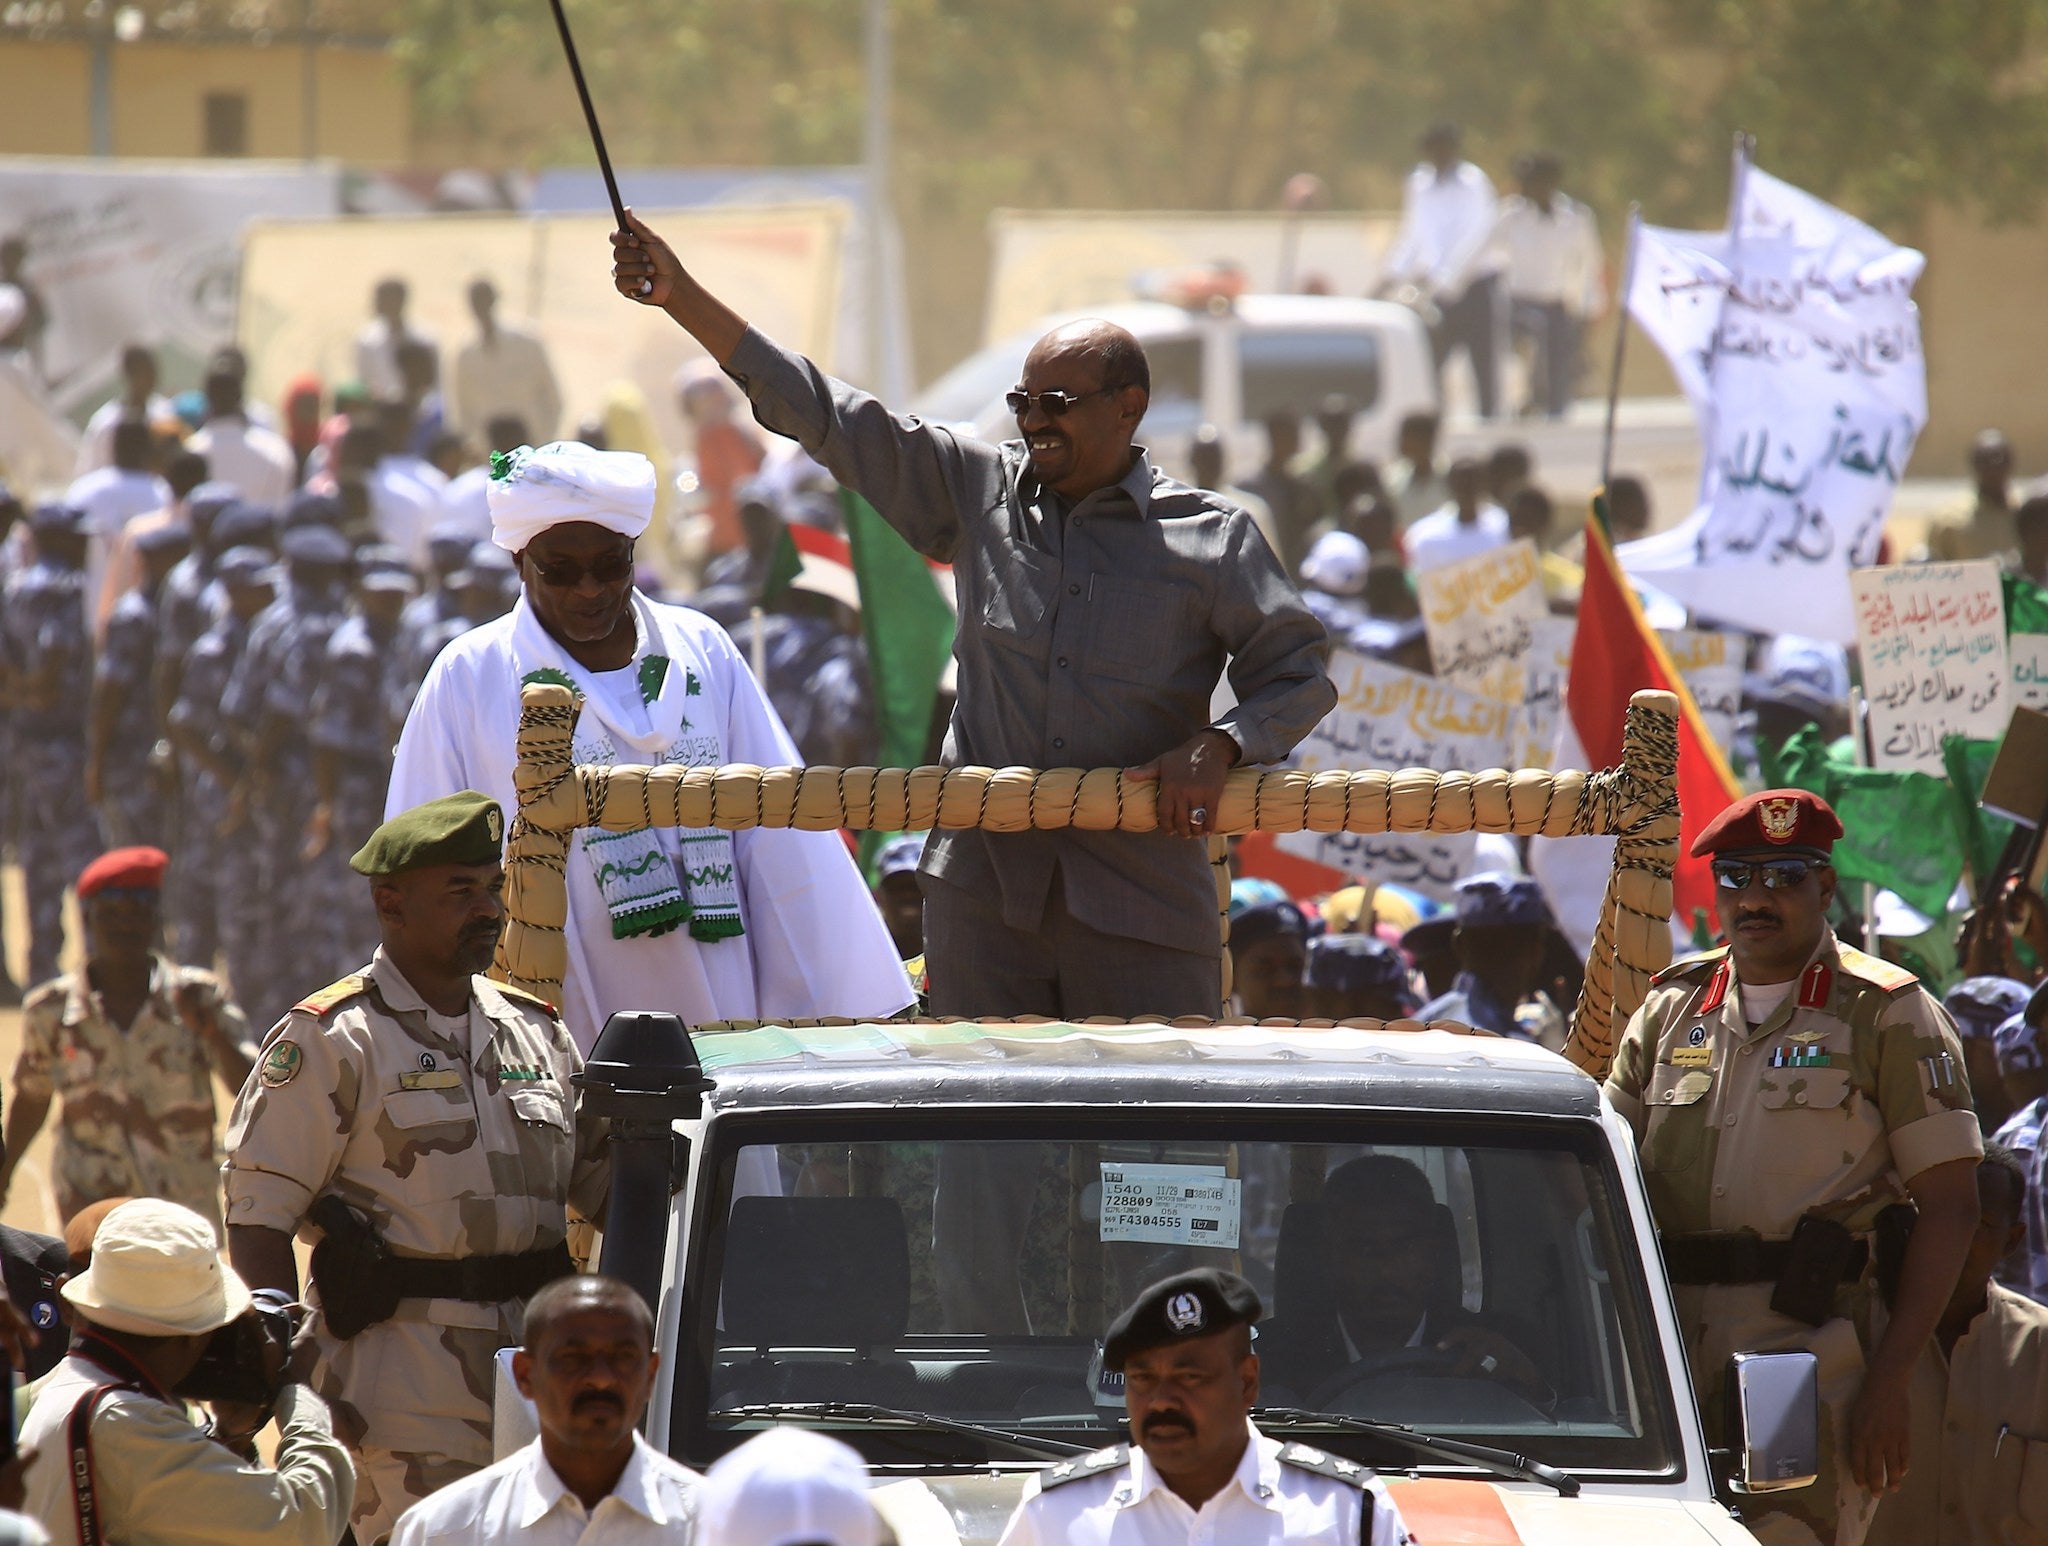 Sudan's President Omar al-Bashir visits North Darfur, with a strong police presence, while campaigning for the 2015 presidential elections